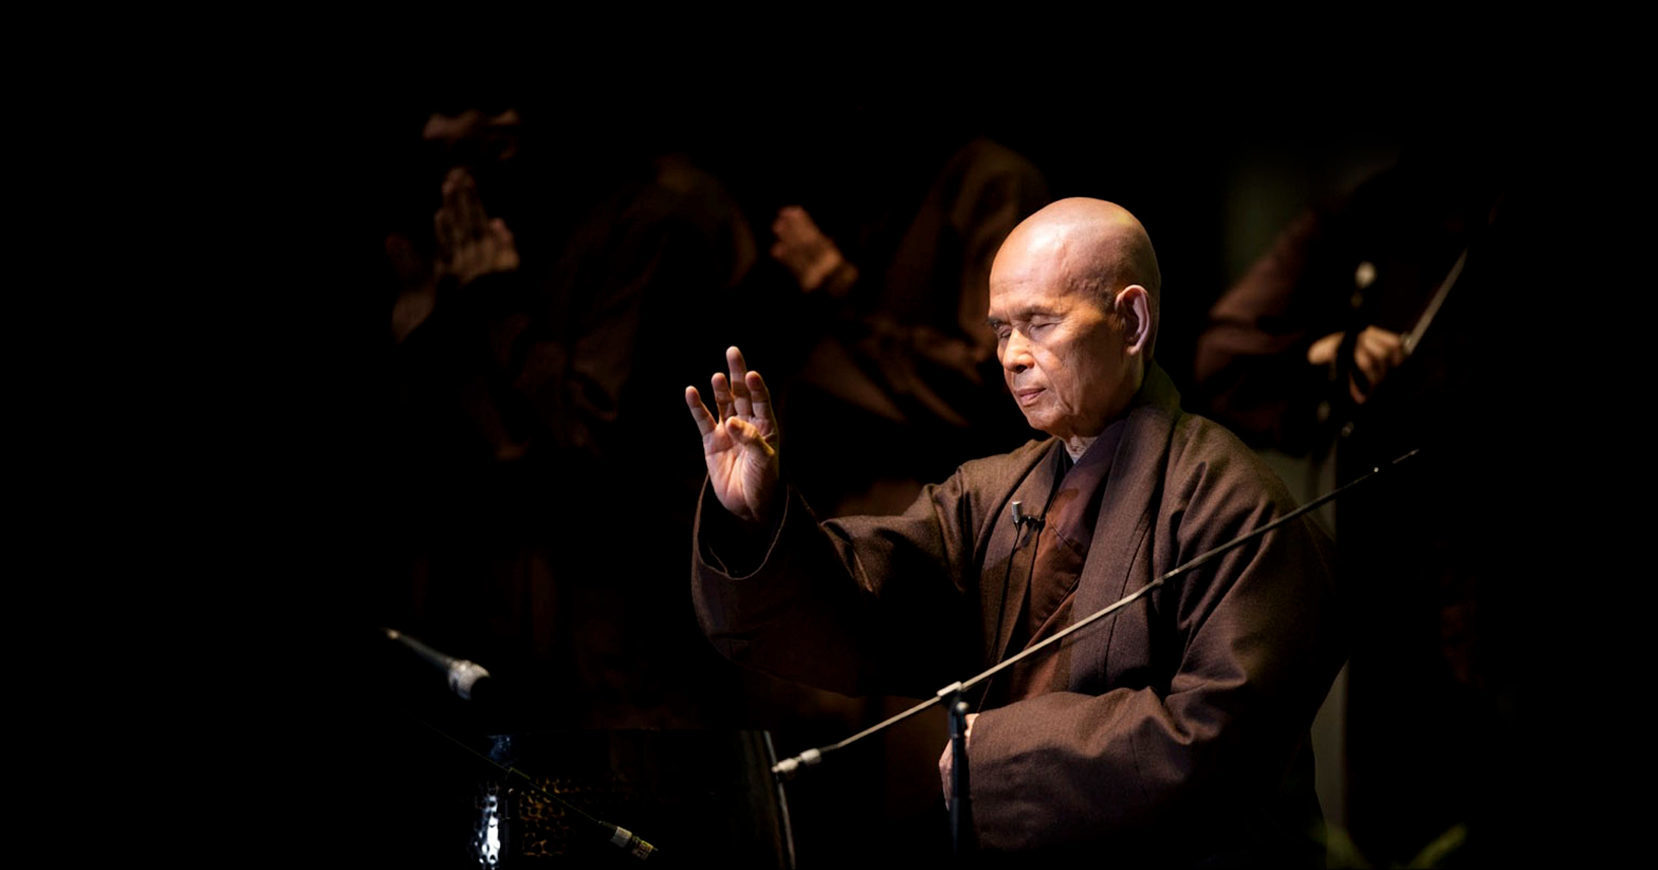 Thich buddhist nhat hanh monk Remembering Thich